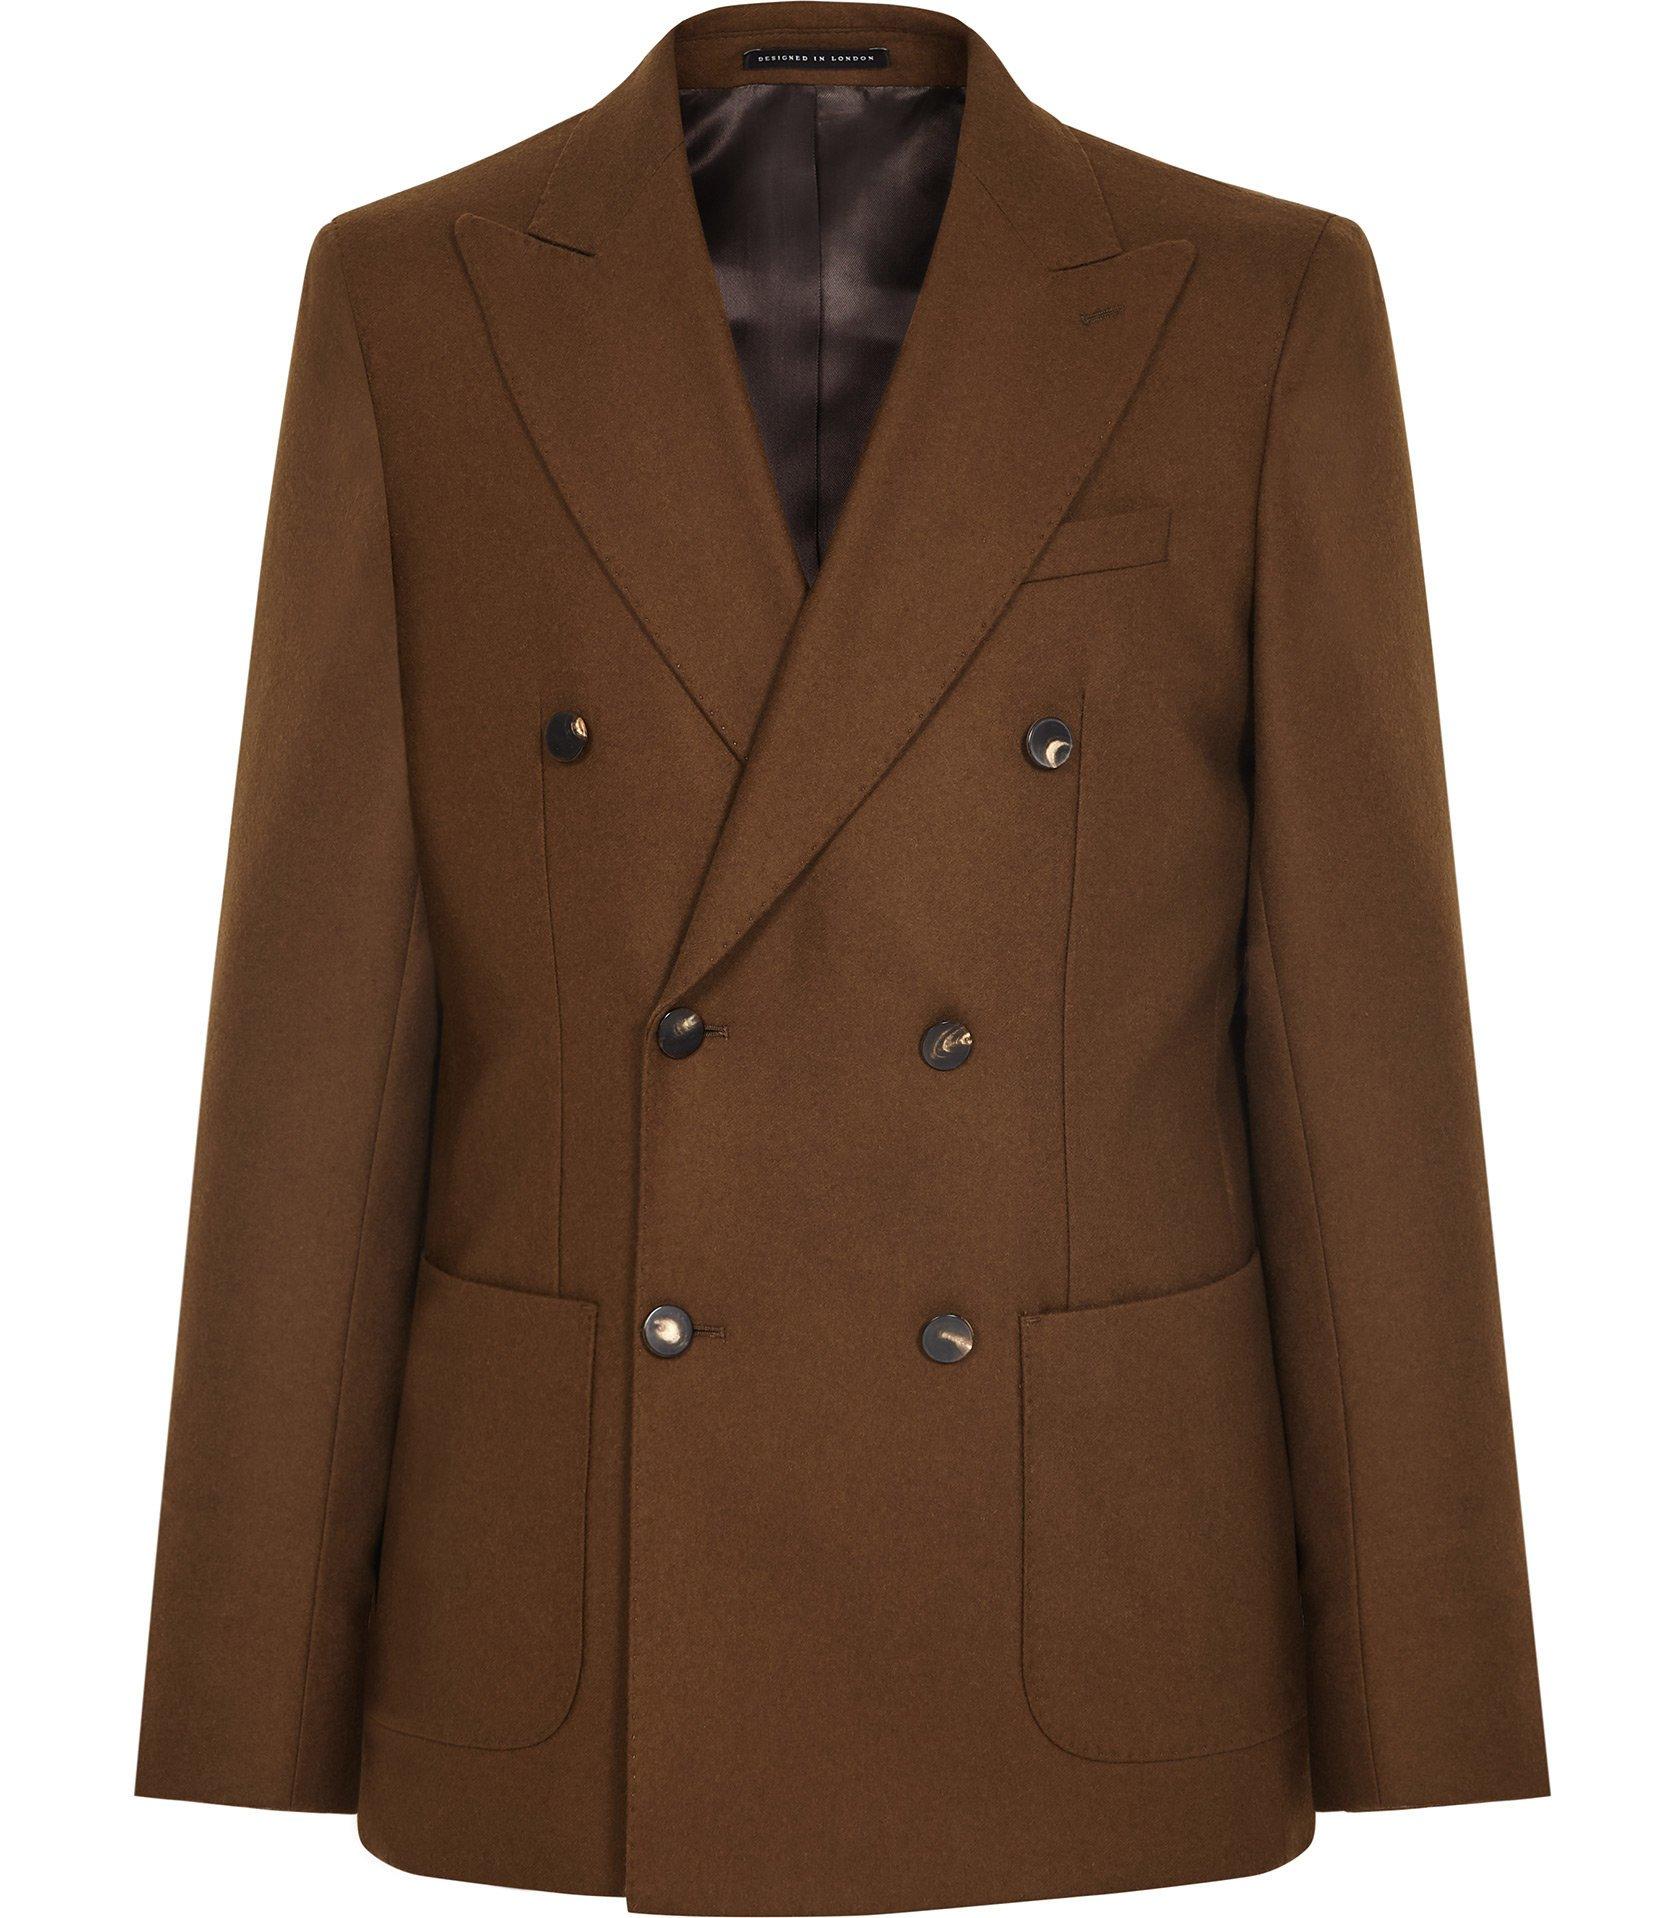 Reiss Magnum - Double Breasted Blazer in Brown for Men